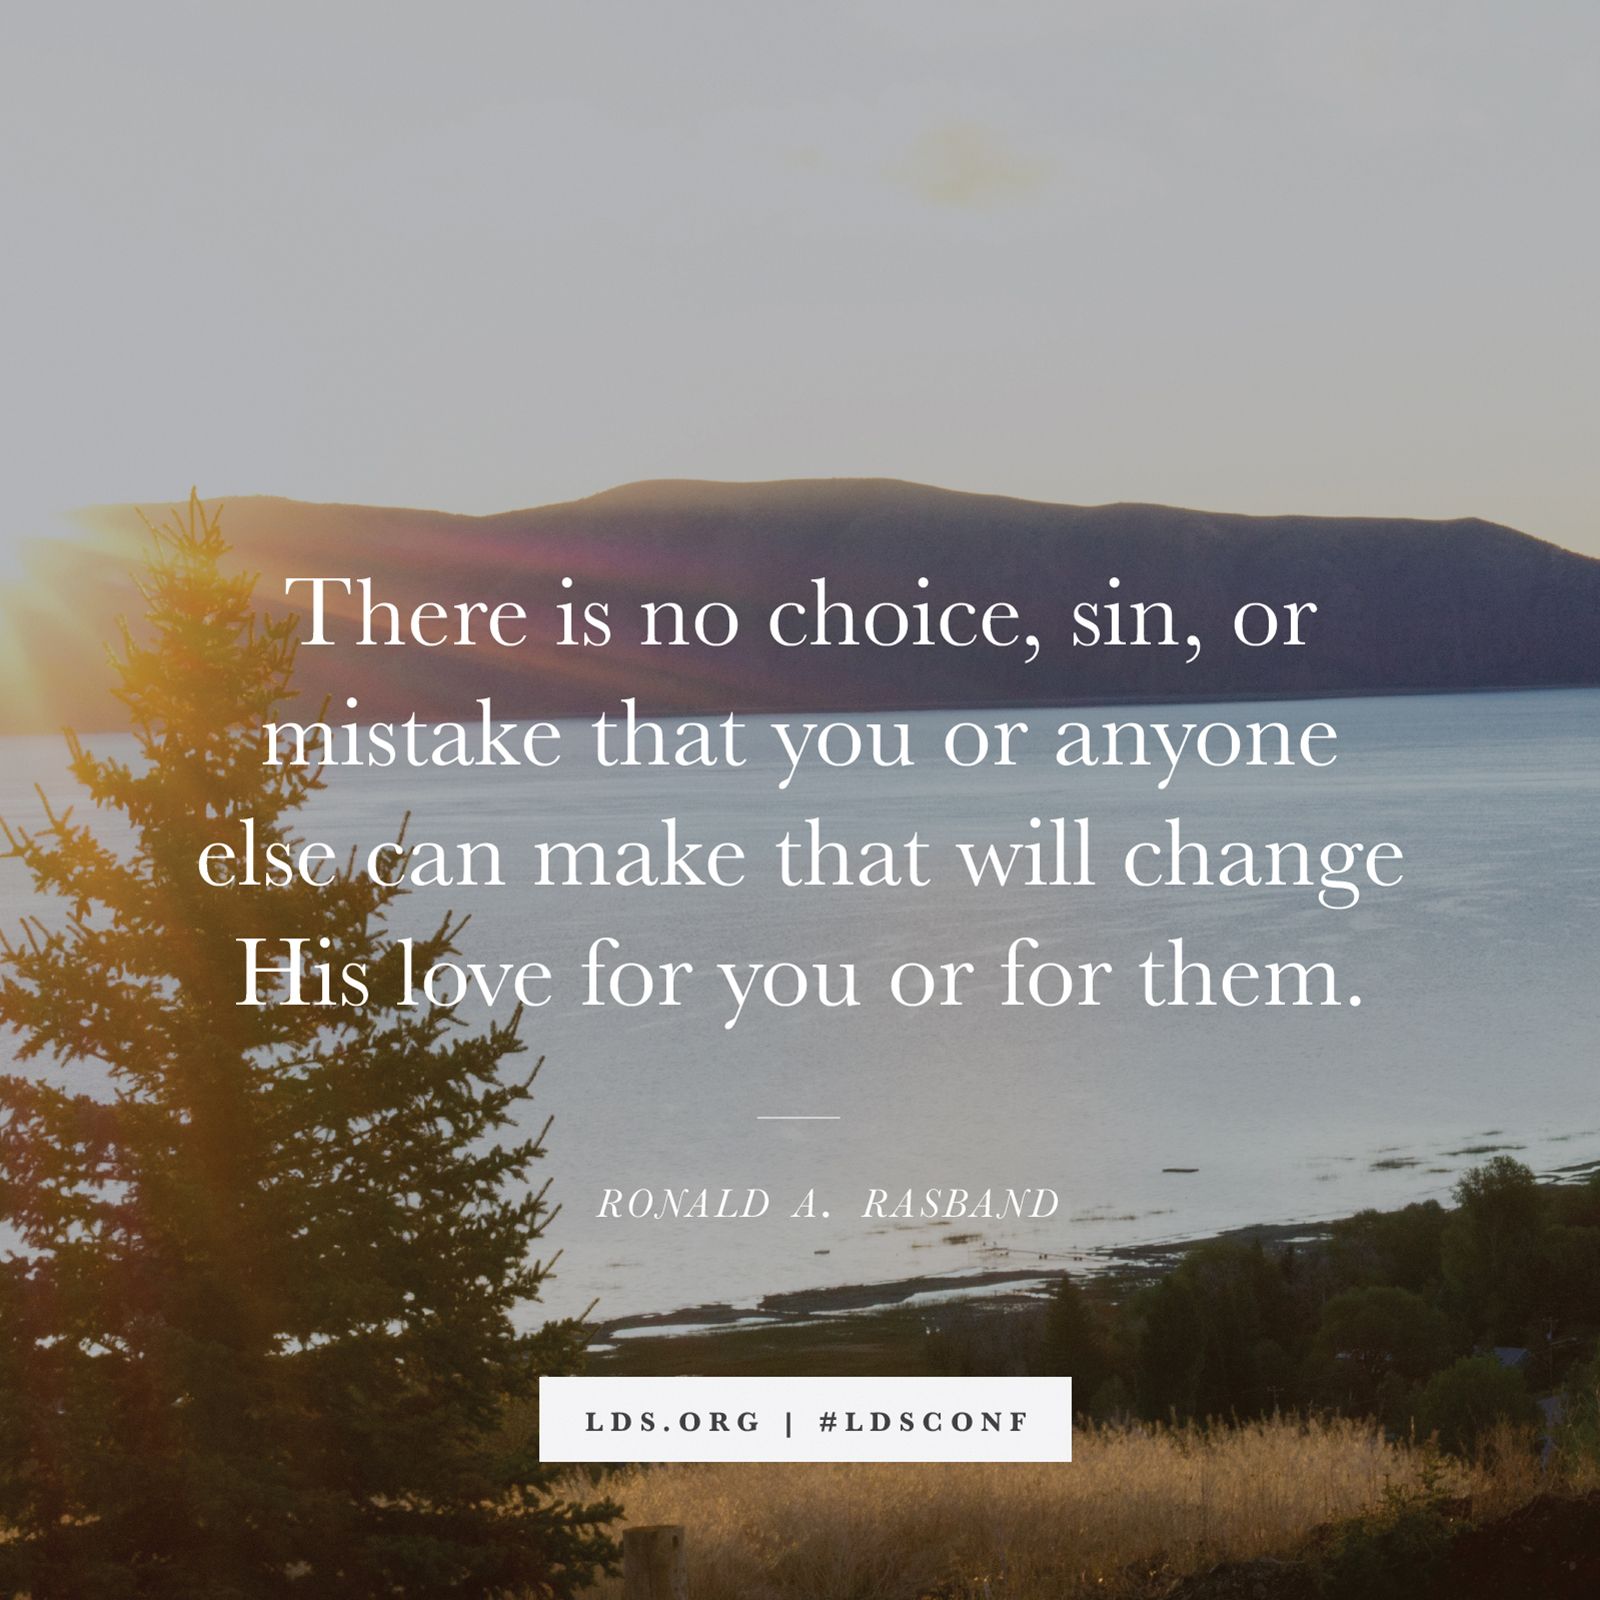 “There is no choice, sin, or mistake that you or anyone else can make that will change His love for you or for them.” —Elder Ronald A. Rasband, “I Stand All Amazed”